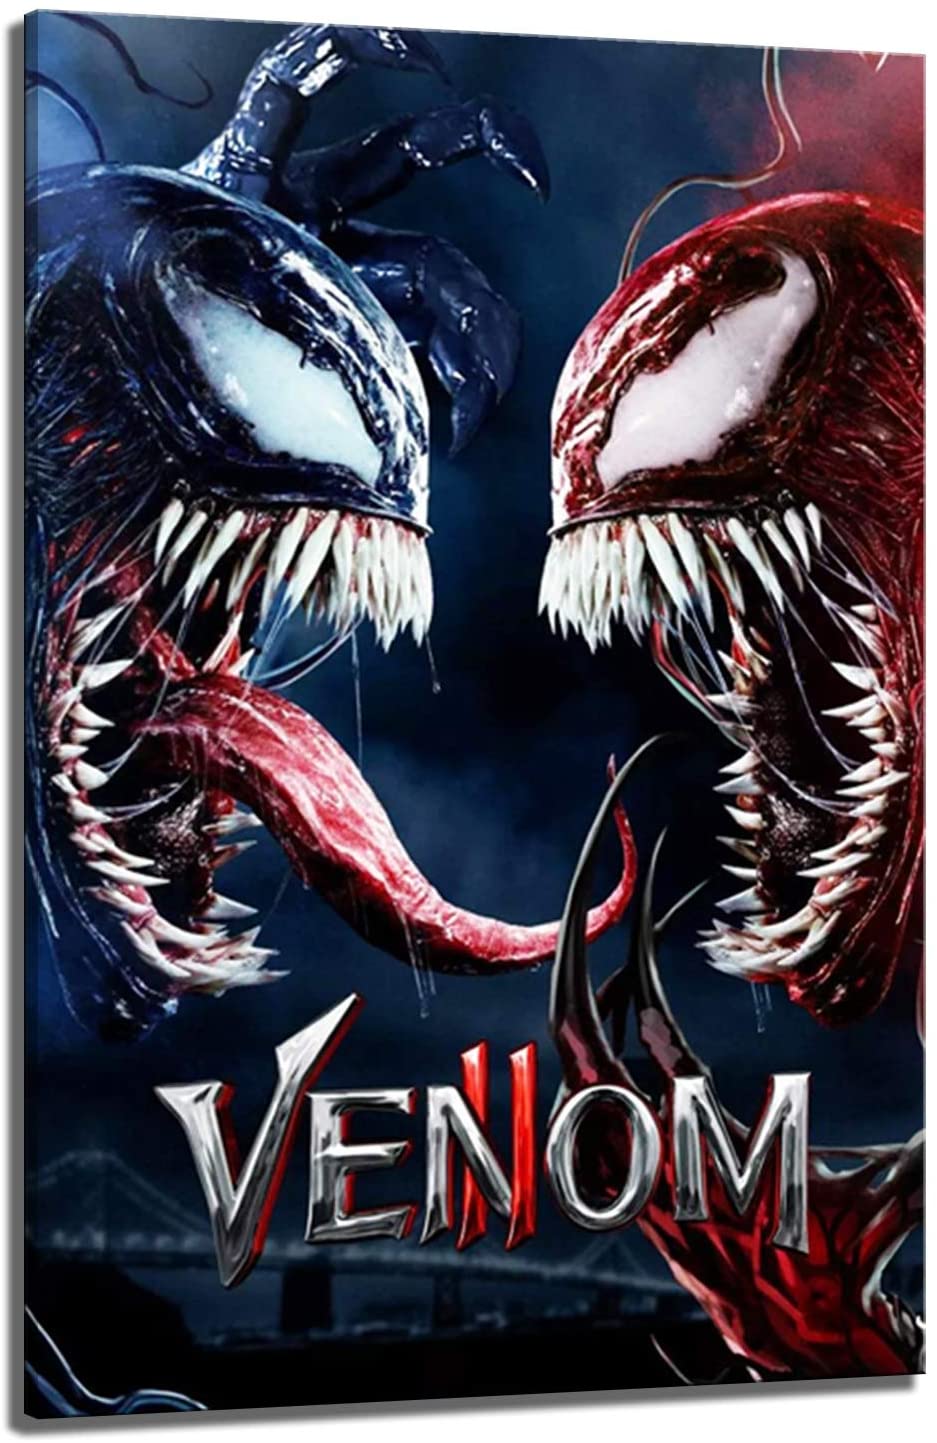 Buy Venom: Let There Be Carnage Poster 2021 Movie Cover Poster Wall Decoration Gift Easy To Hang HD Oil Painting Canvas Printing (24x36inch, No Frame) Online In Kazakhstan. B08YMM5VZH